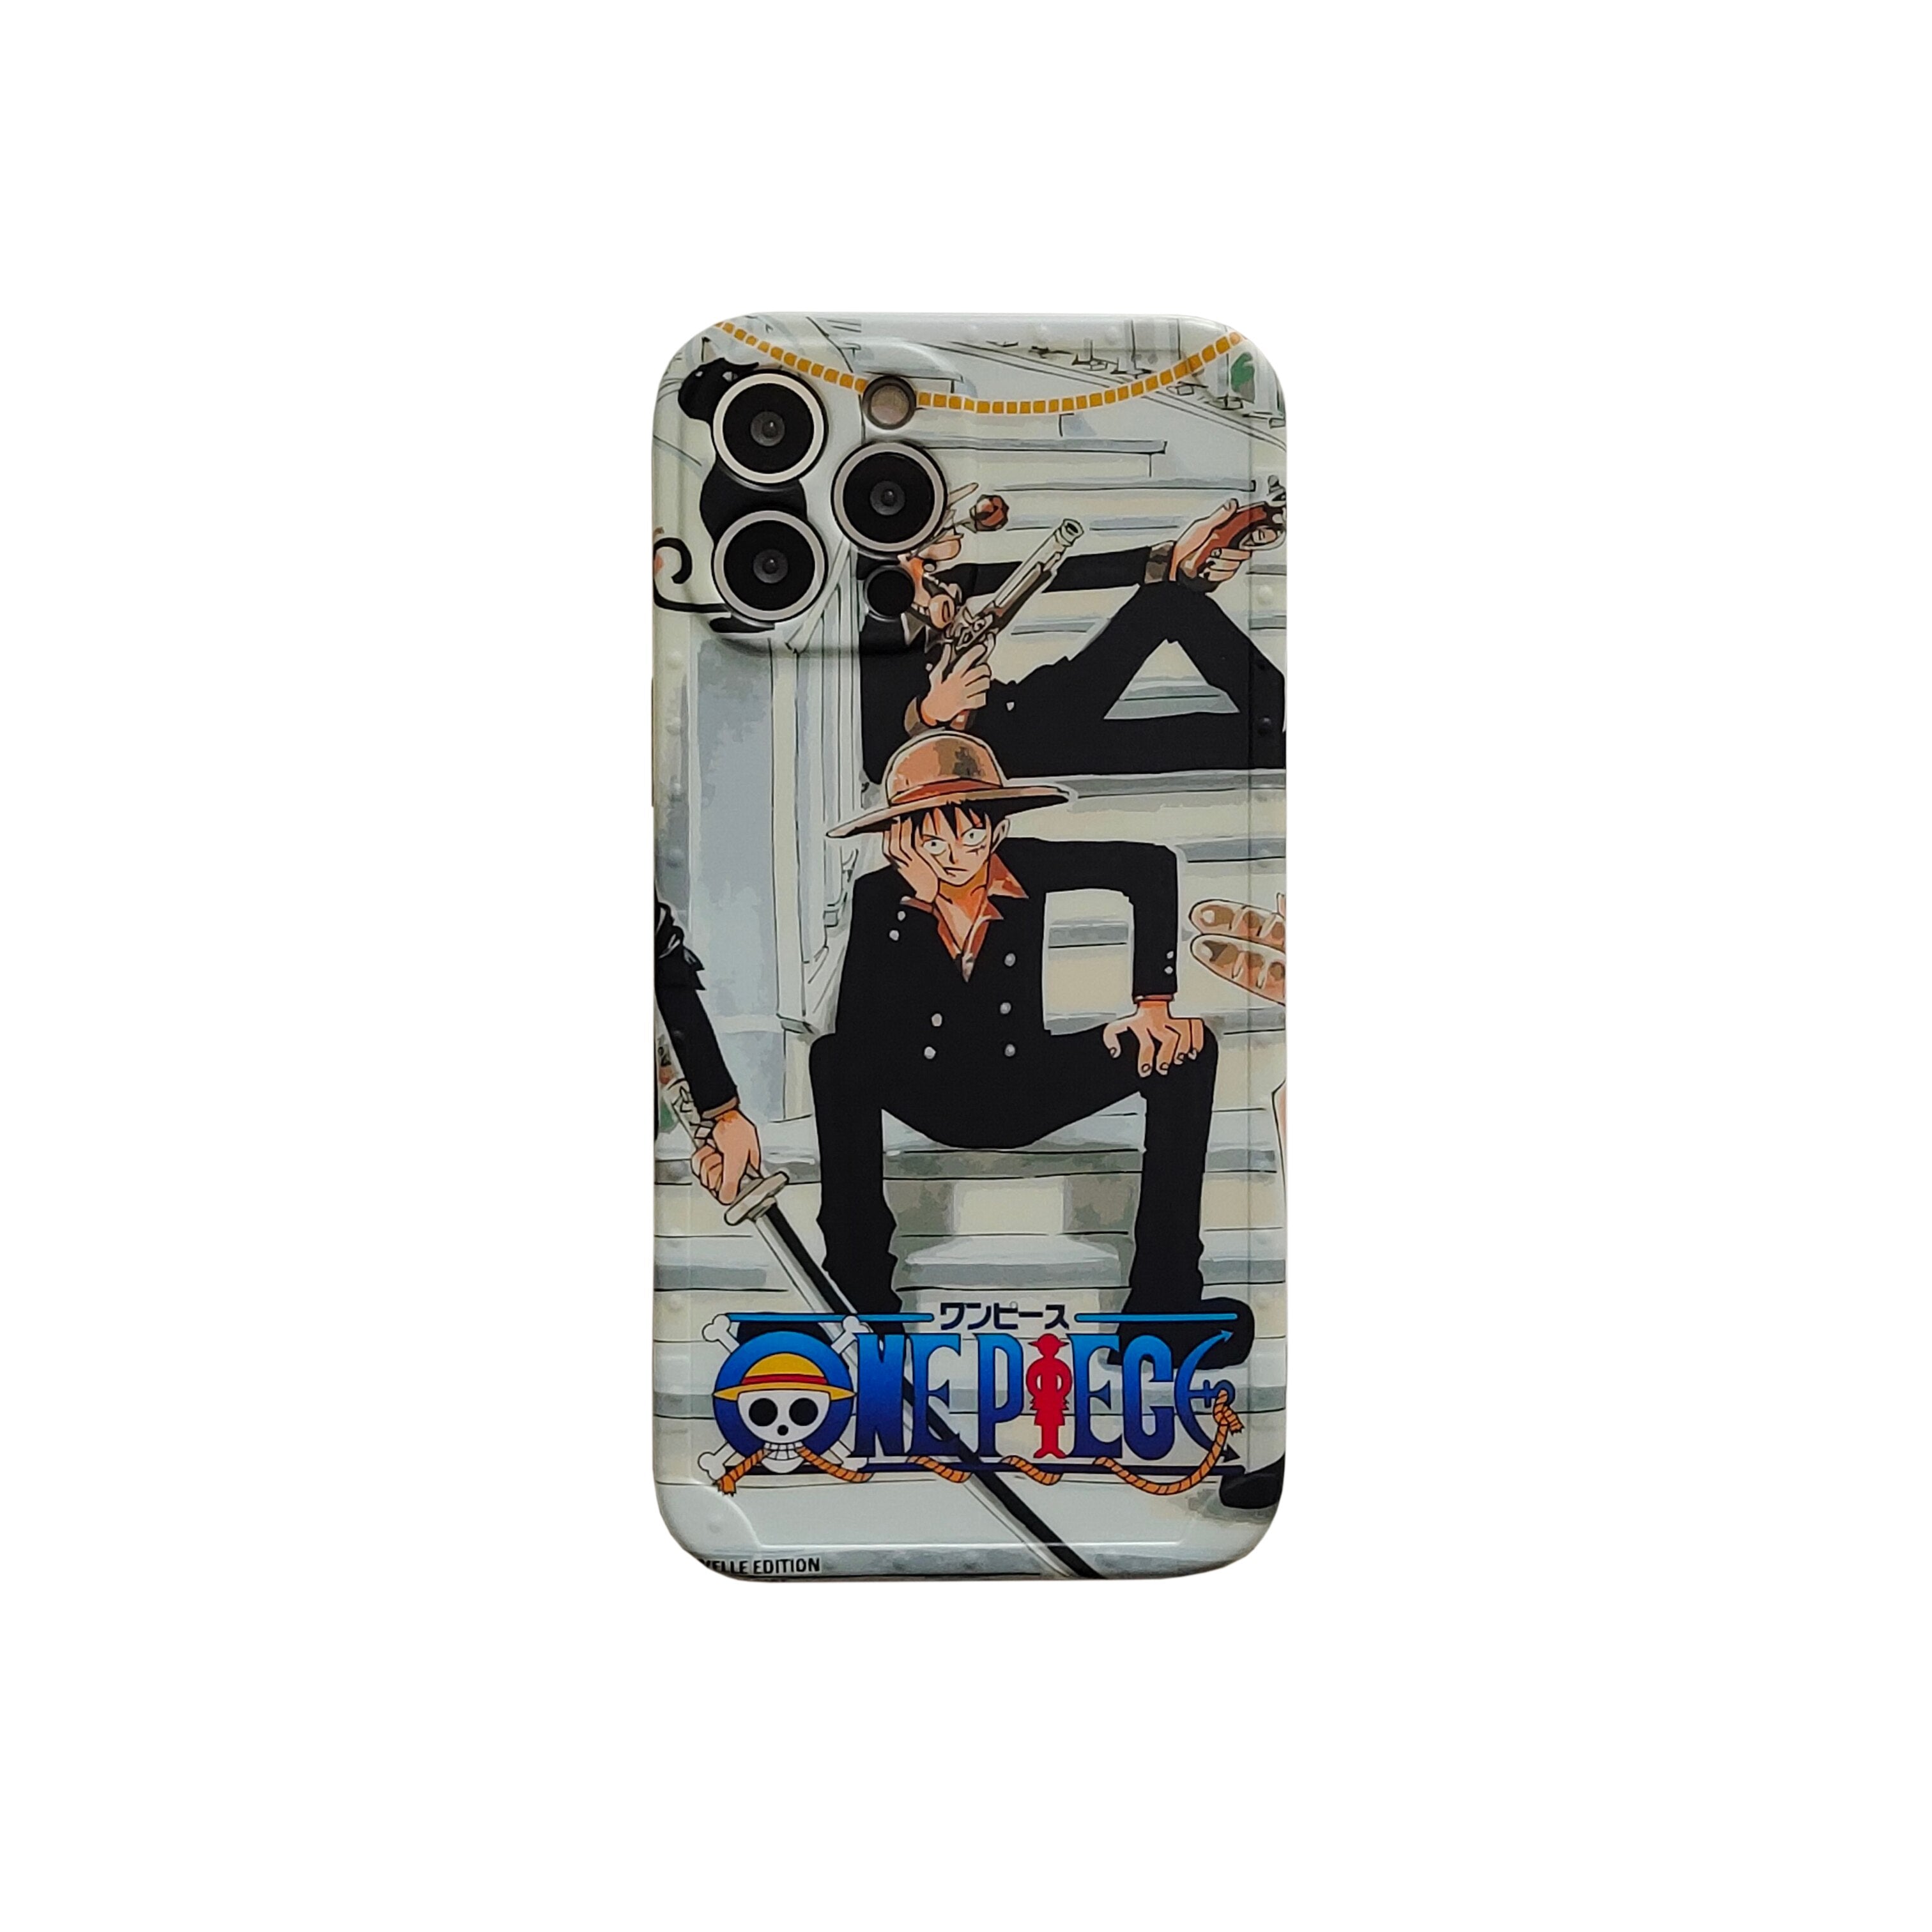 One Piece Japan Anime Zoro Luffy Phone Case for Iphone